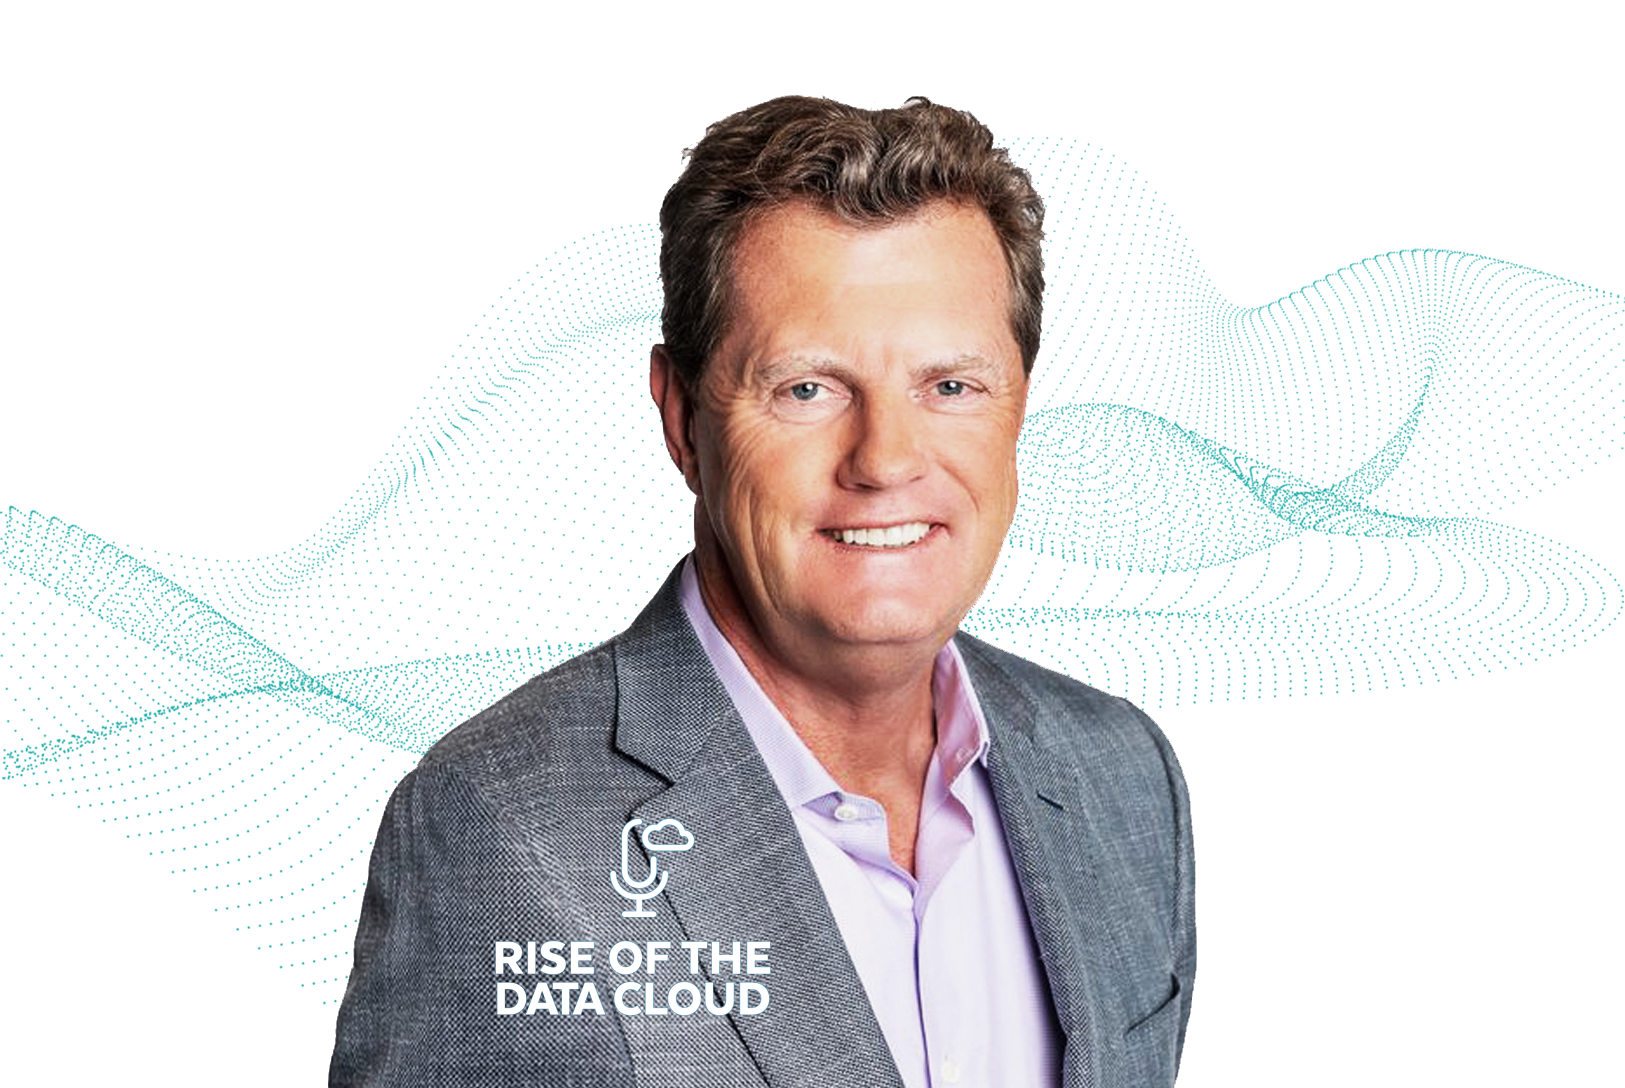 Snowflake CEO Frank Slootman Discusses What’s Next for the Data Cloud